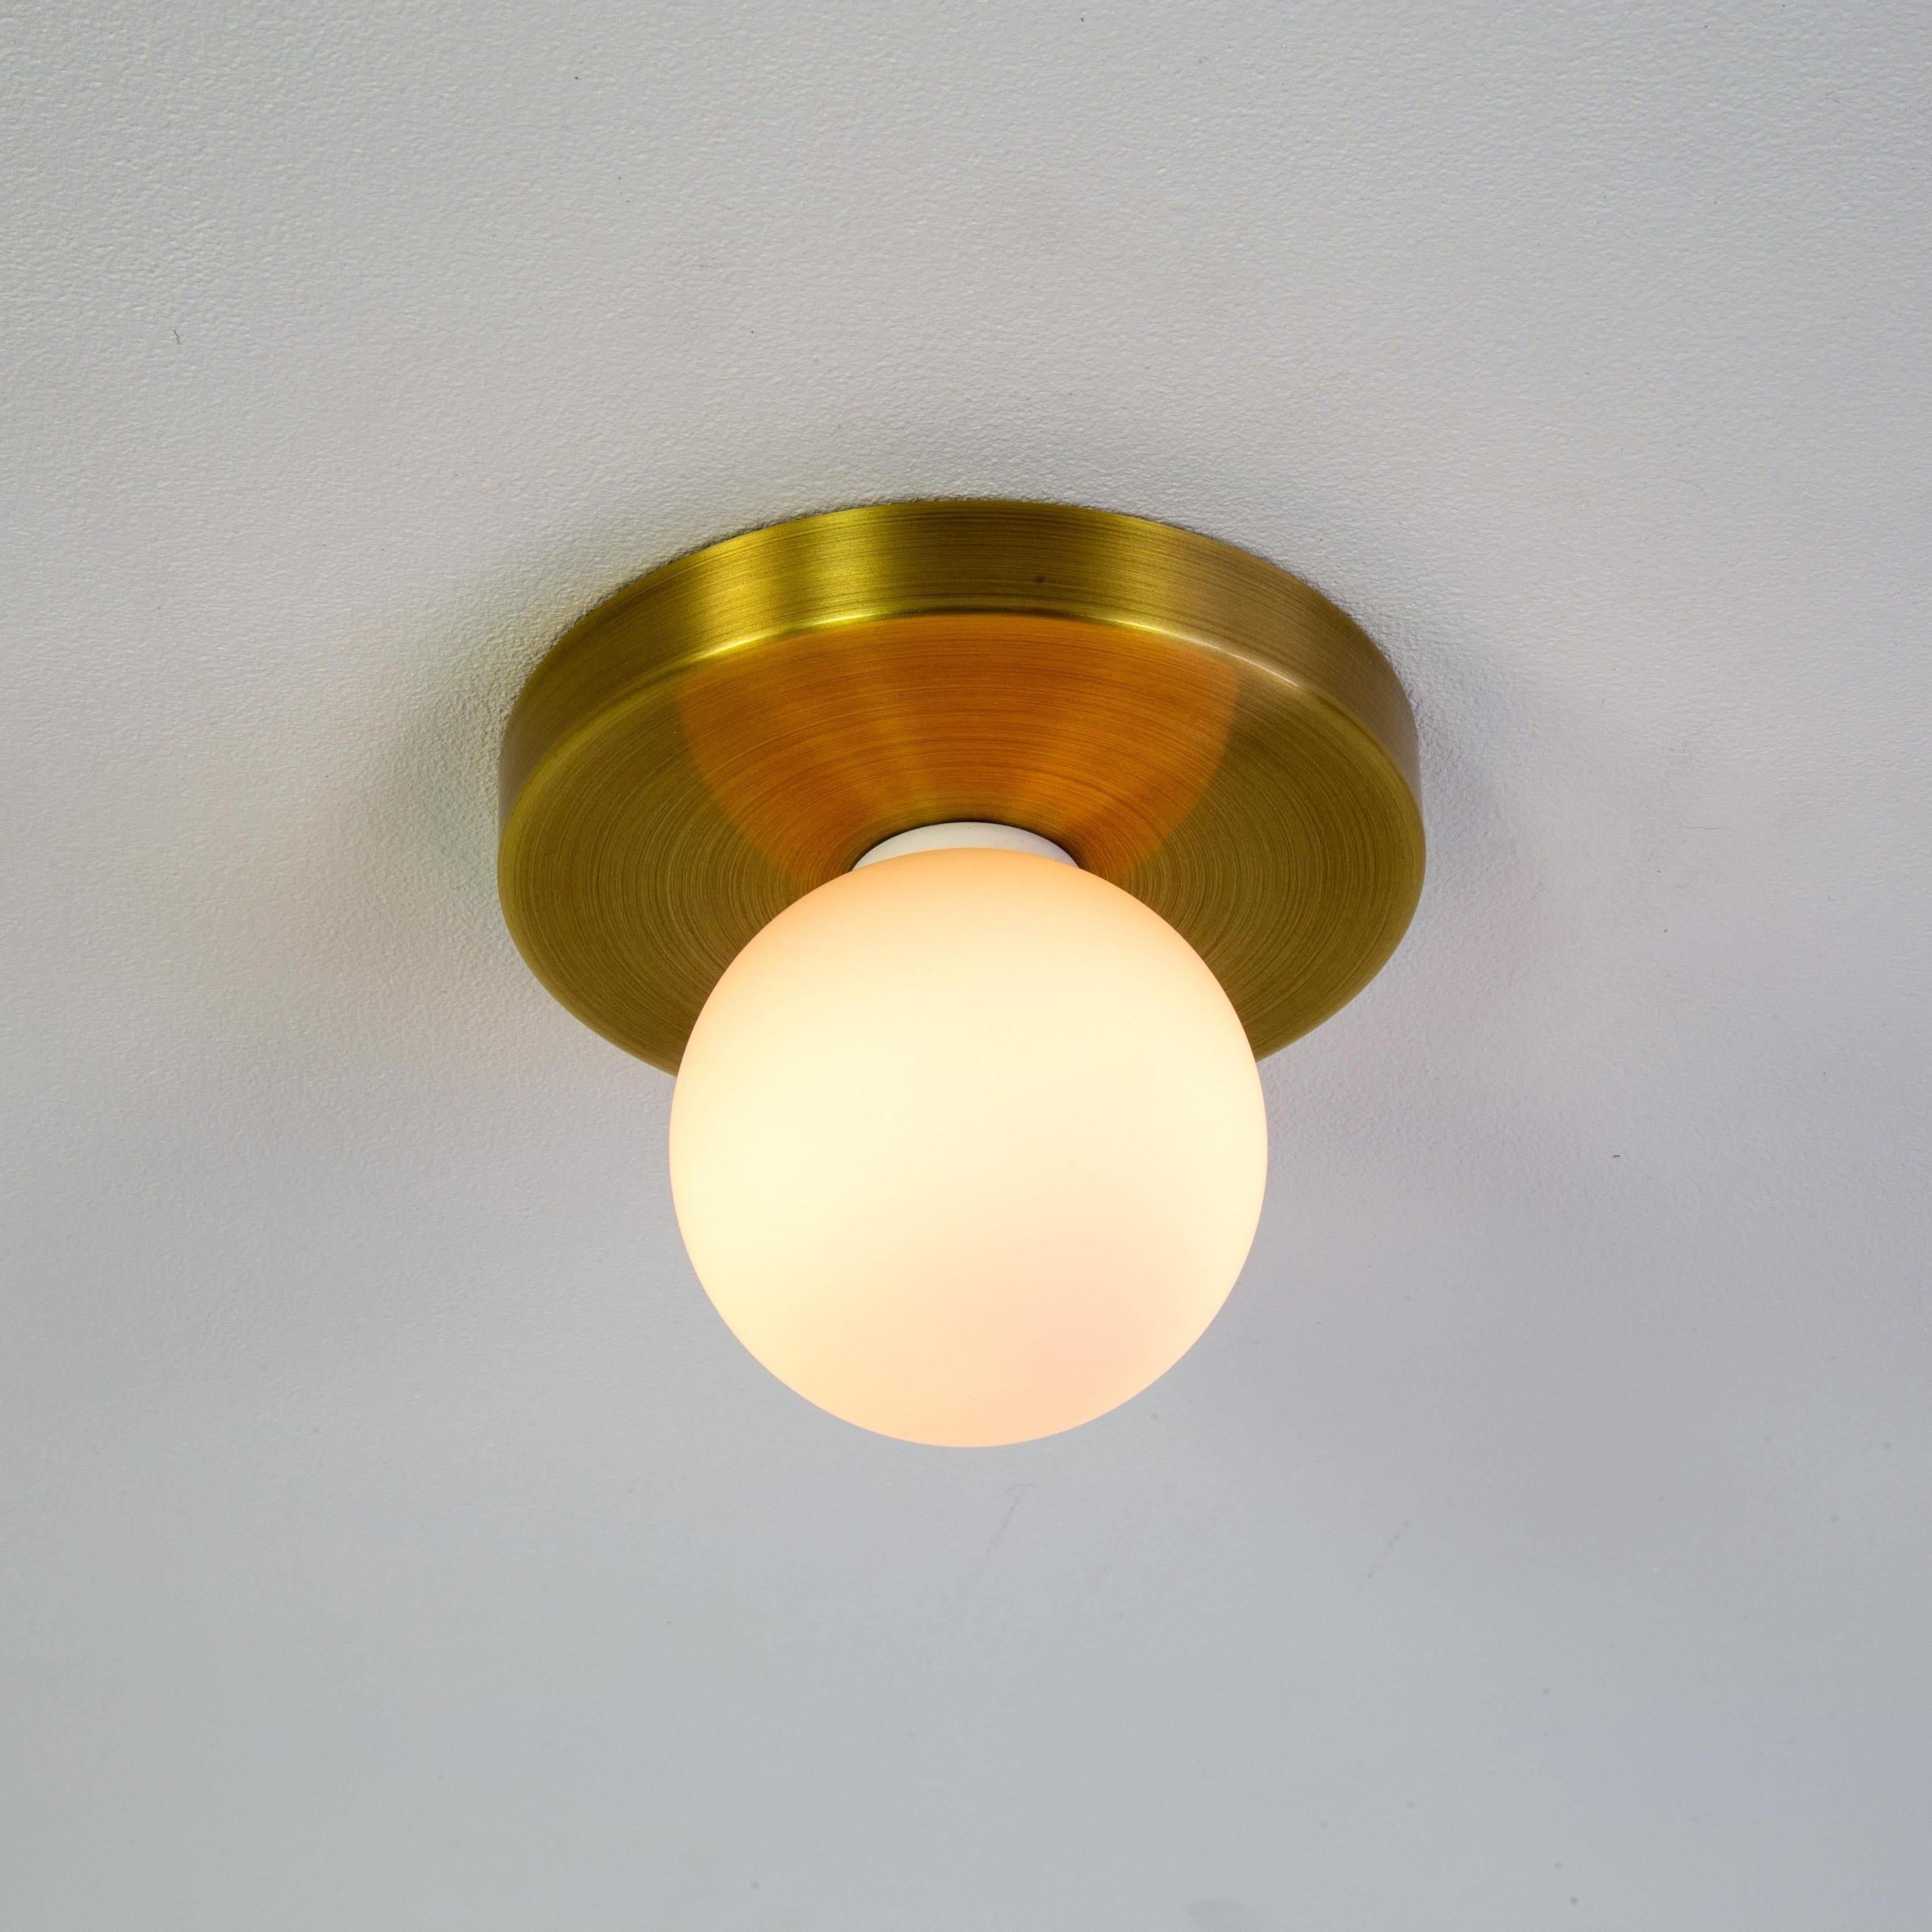 Modern Set of 4 Globe Flush Mounts by Research.Lighting, Brushed Brass, Made to Order For Sale